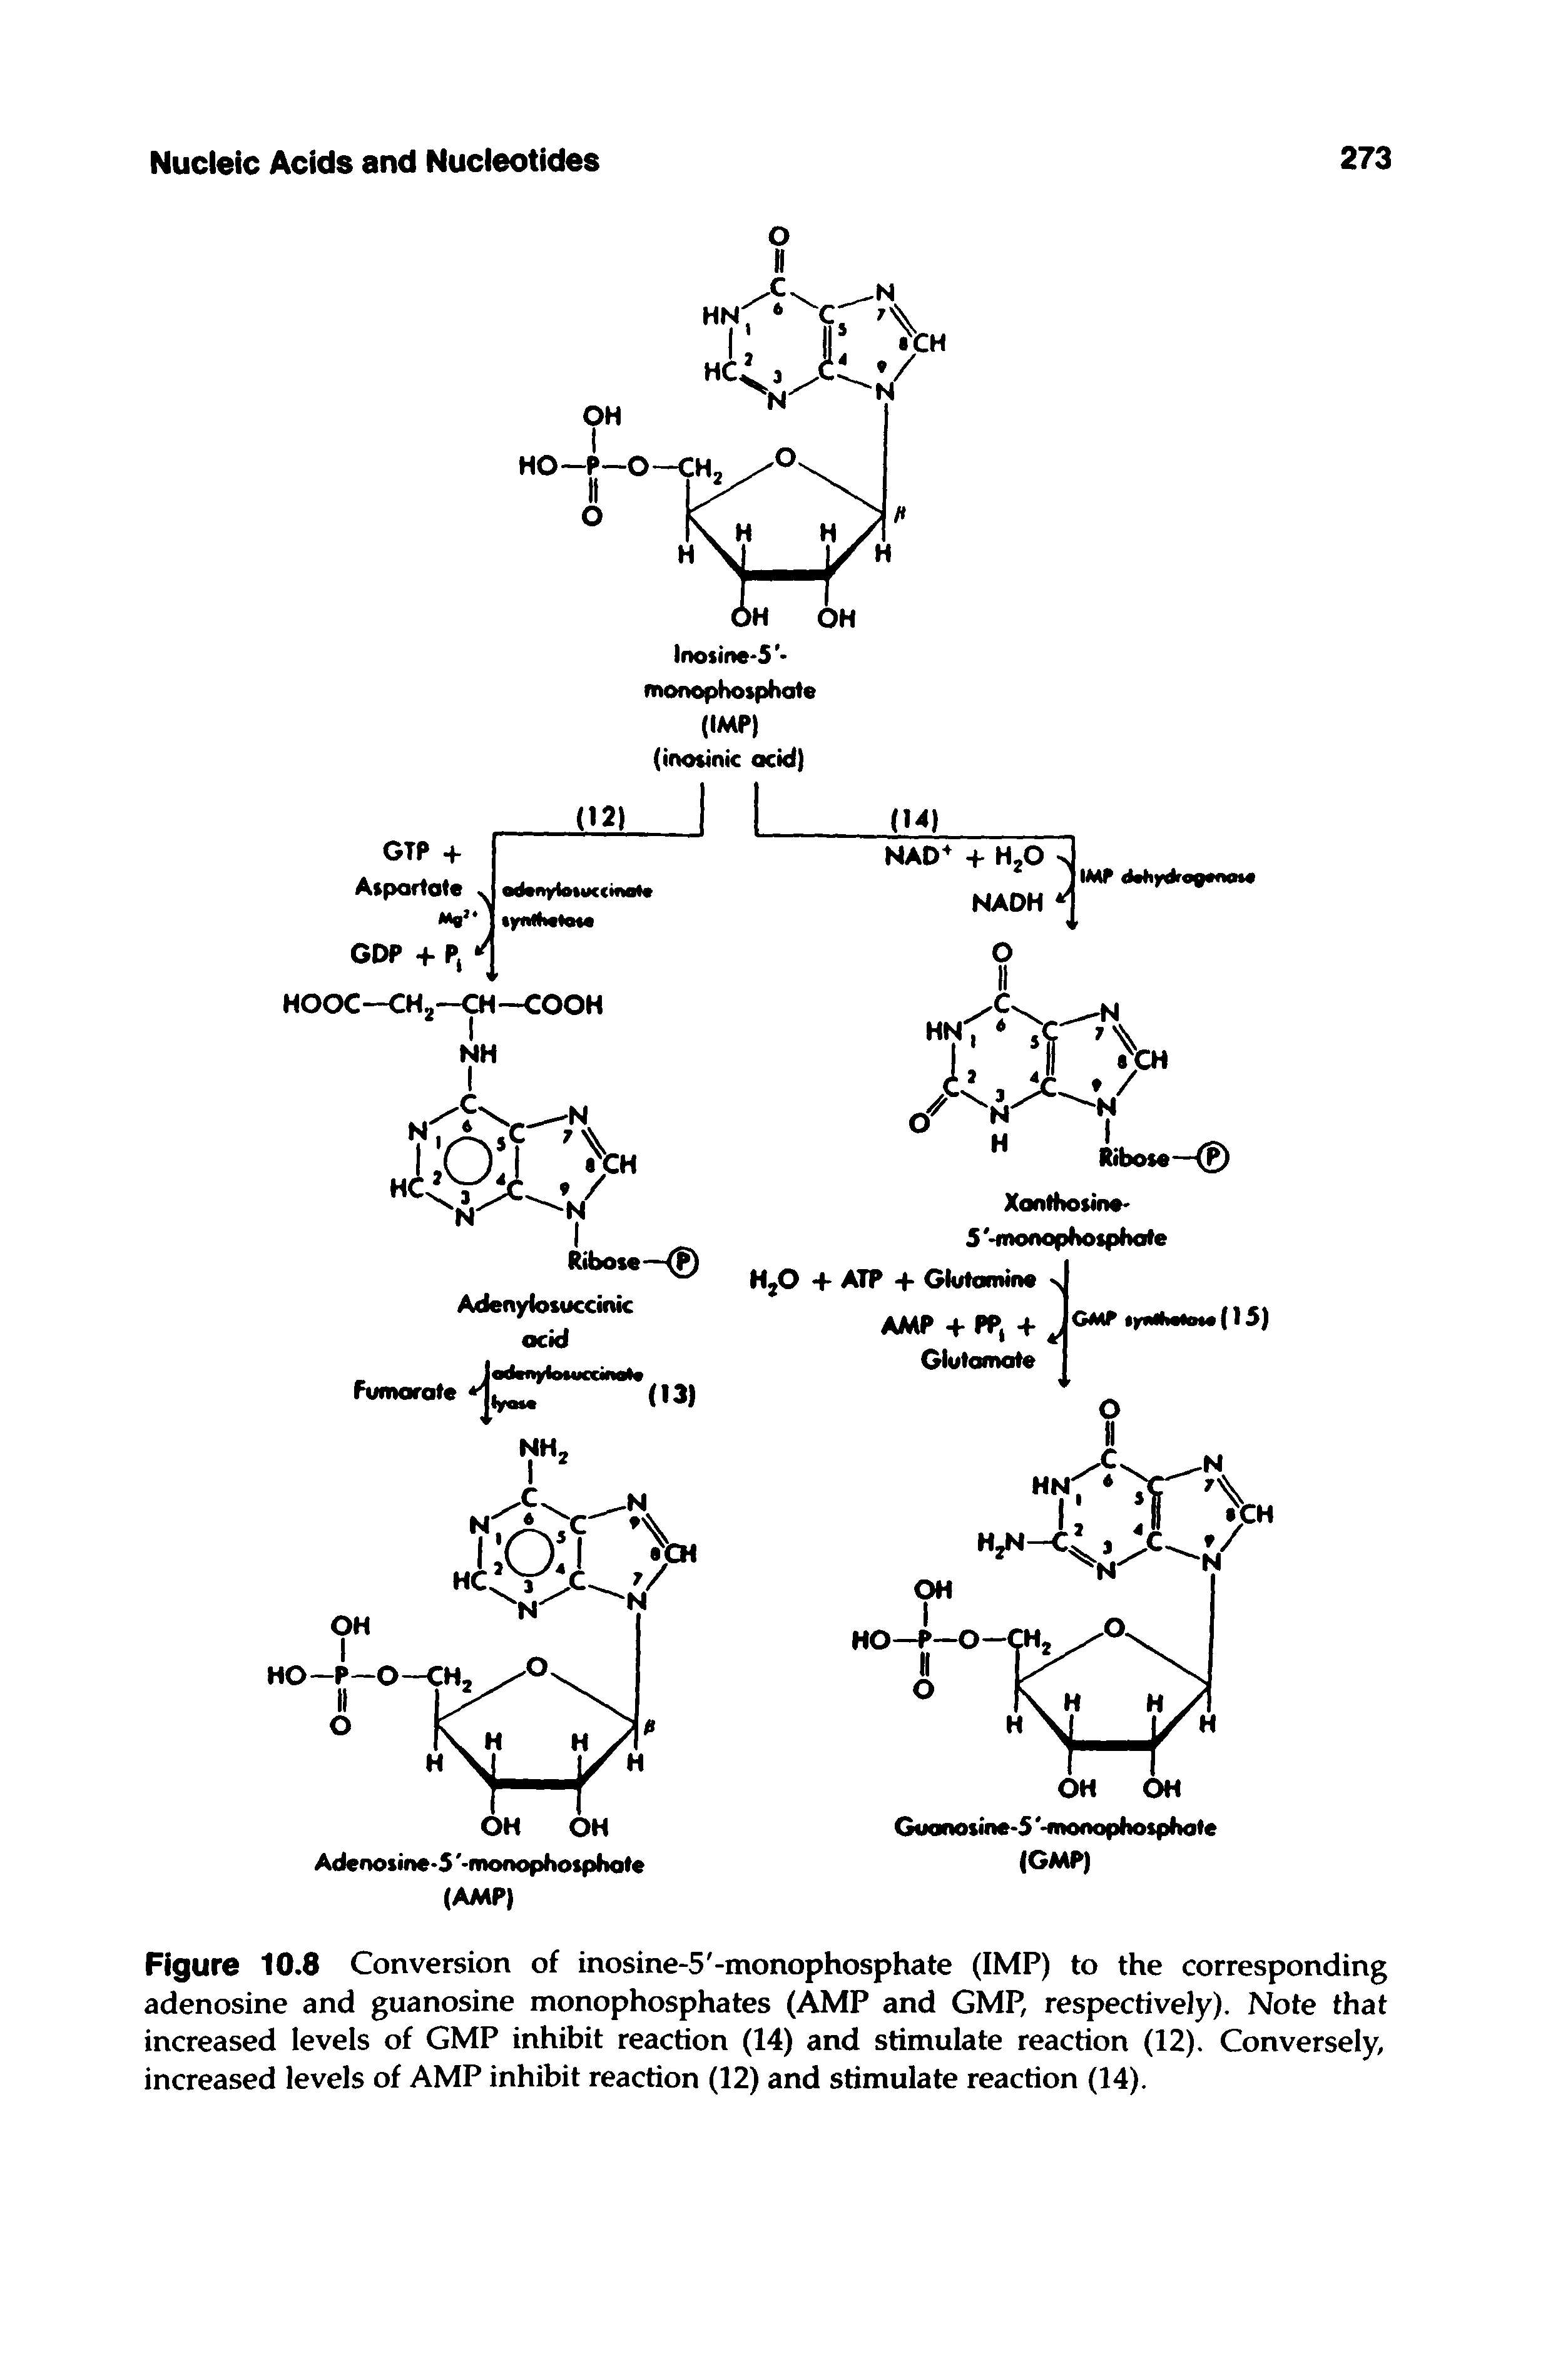 Figure 10.8 Conversion of inosine-5 -monophosphate (IMP) to the corresponding adenosine and guanosine monophosphates (AMP and GMP, respectively). Note that increased levels of GMP inhibit reaction (14) and stimulate reaction (12). Conversely, increased levels of AMP inhibit reaction (12) and stimulate reaction (14).